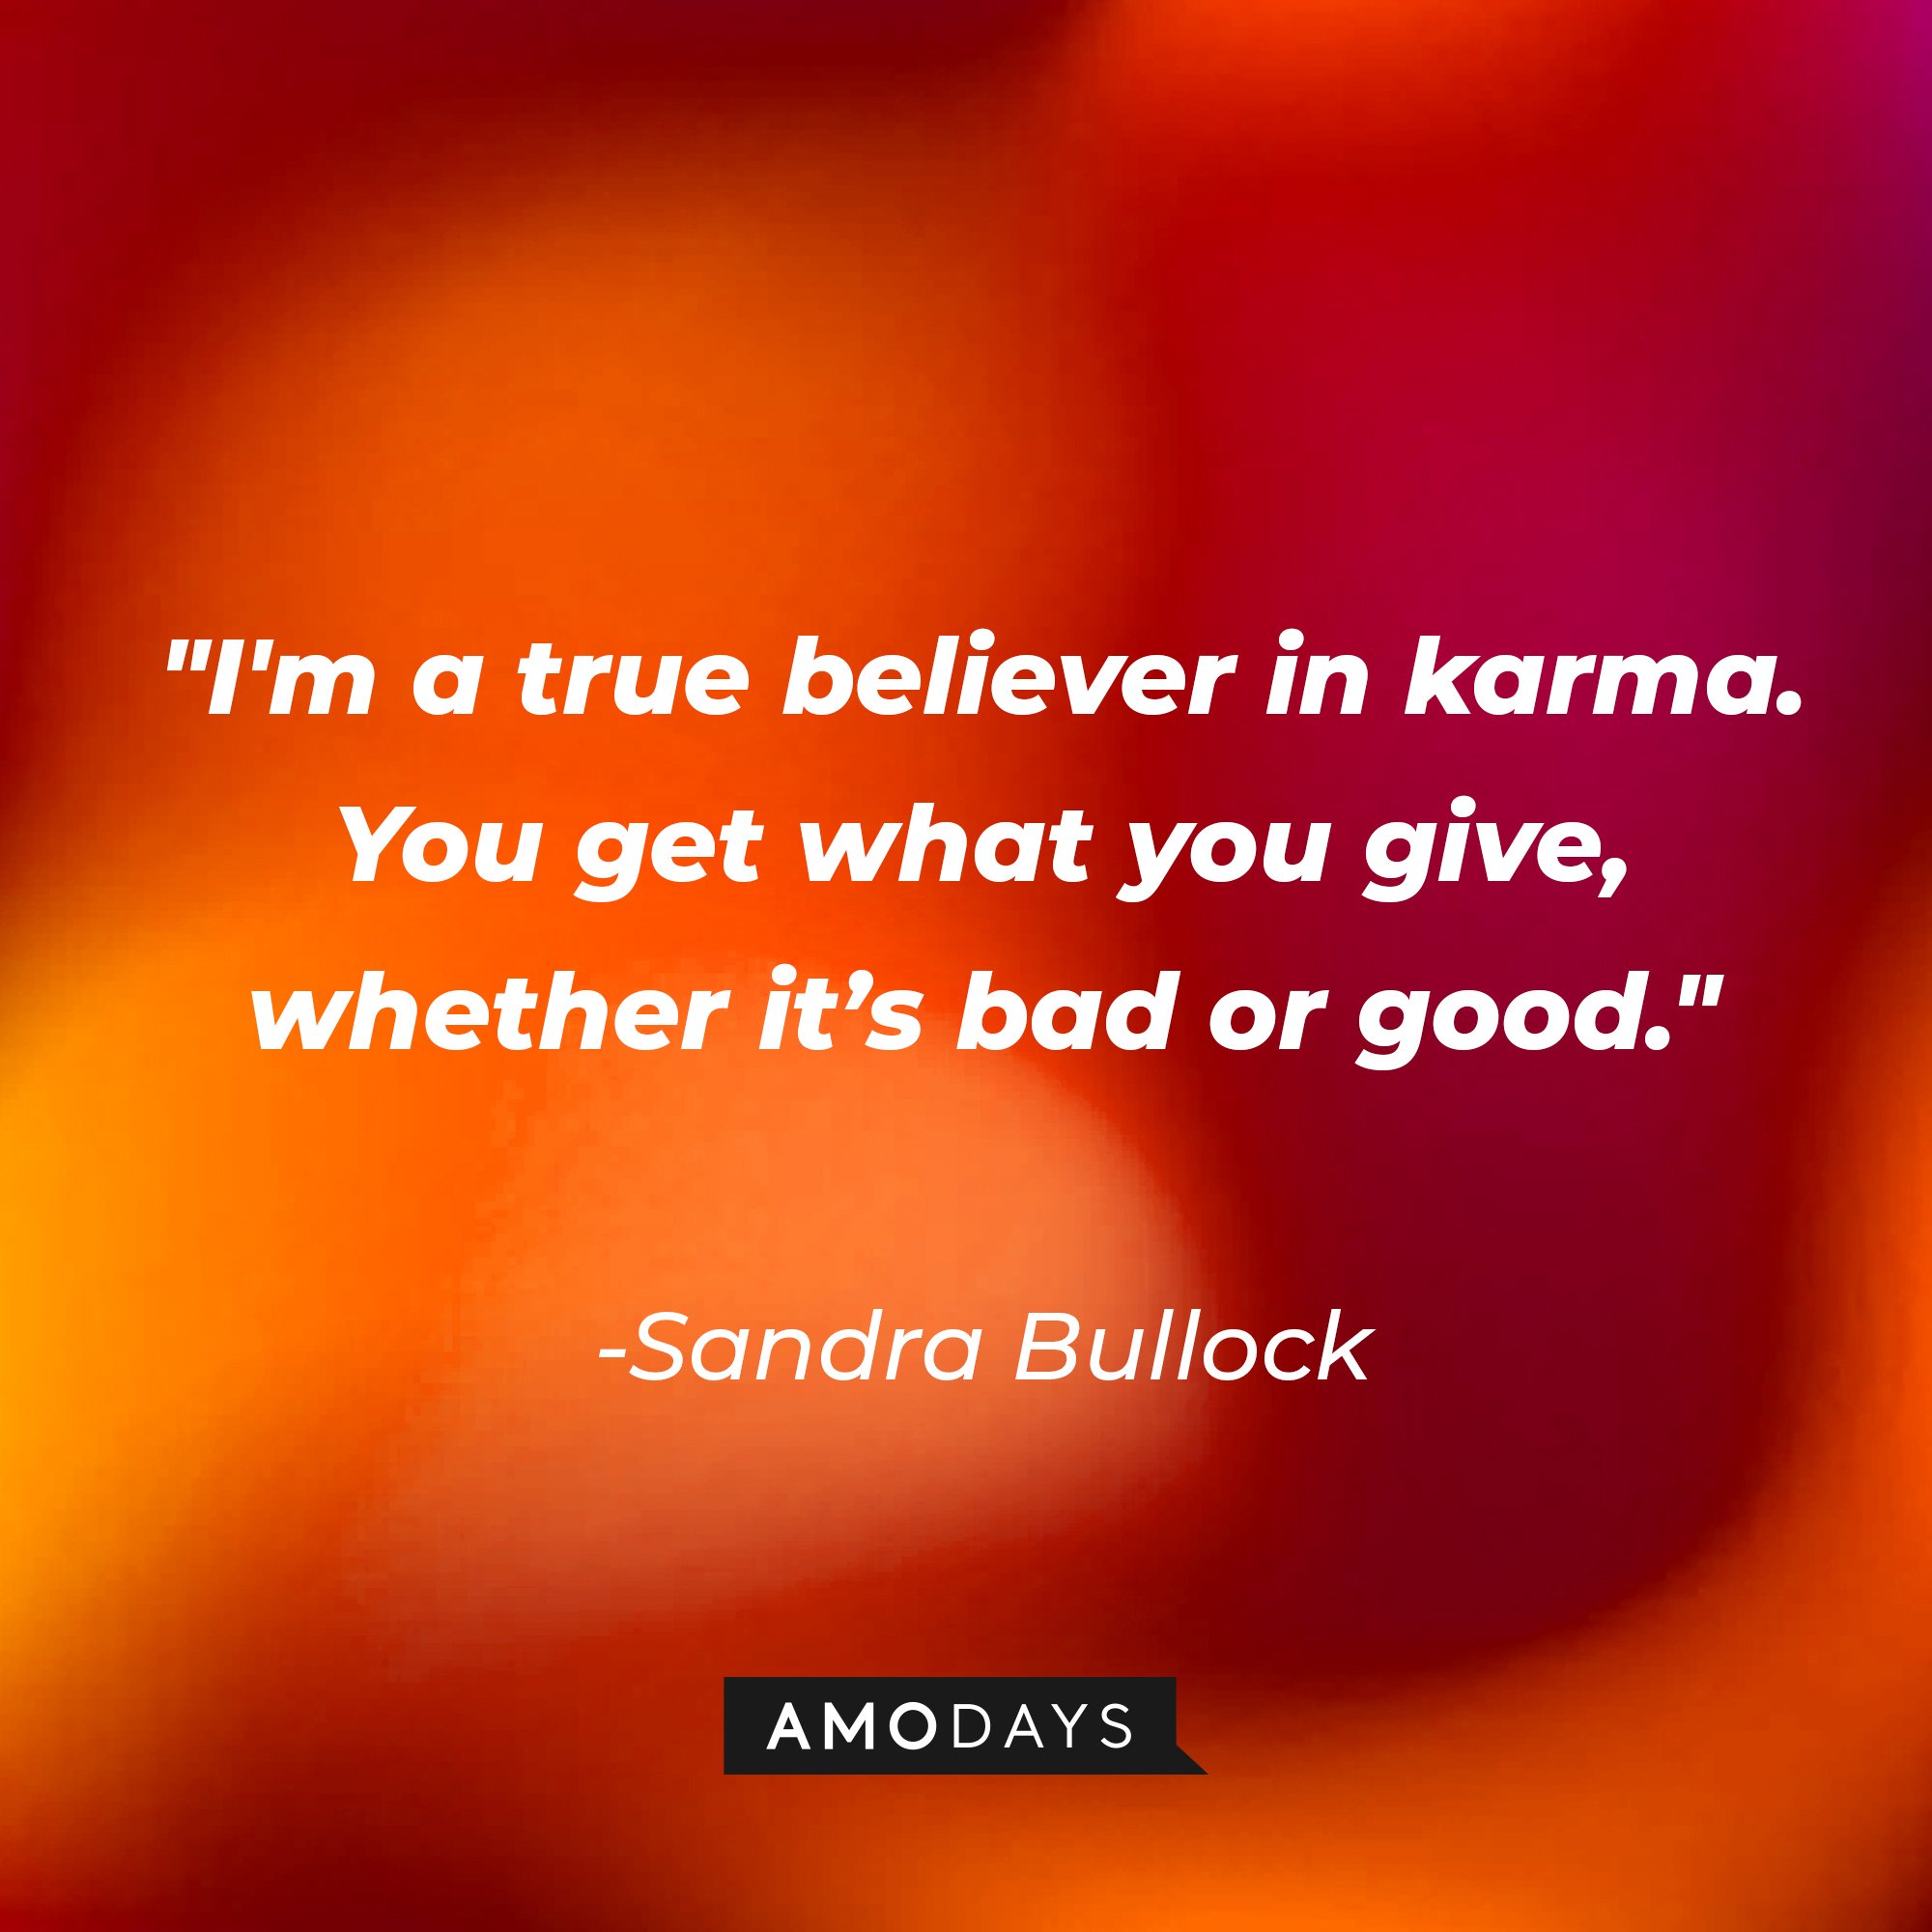 Sandra Bullock’s quote: "I'm a true believer in karma. You get what you give, whether it’s bad or good." | Image: AmoDays